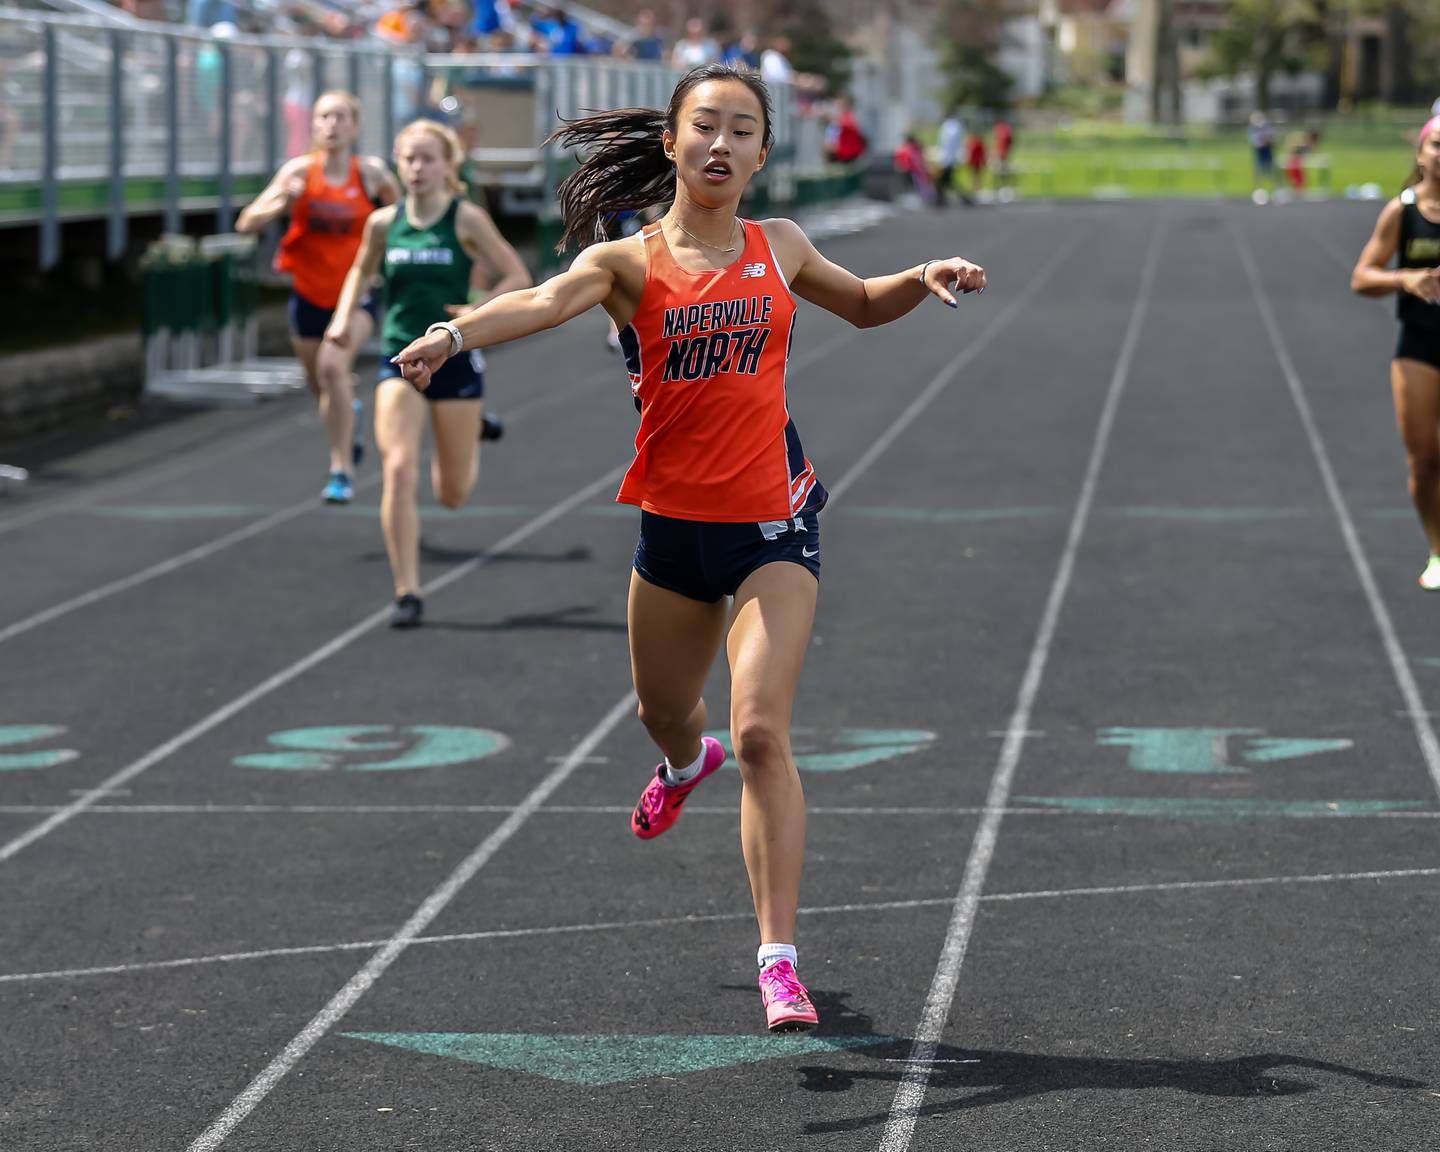 Naperville North's Christina Gu finishes first in the 400 yard dash at the Glenbard West's Sue Pariseau Girls Track and Field Invitational.  April 23.2022.